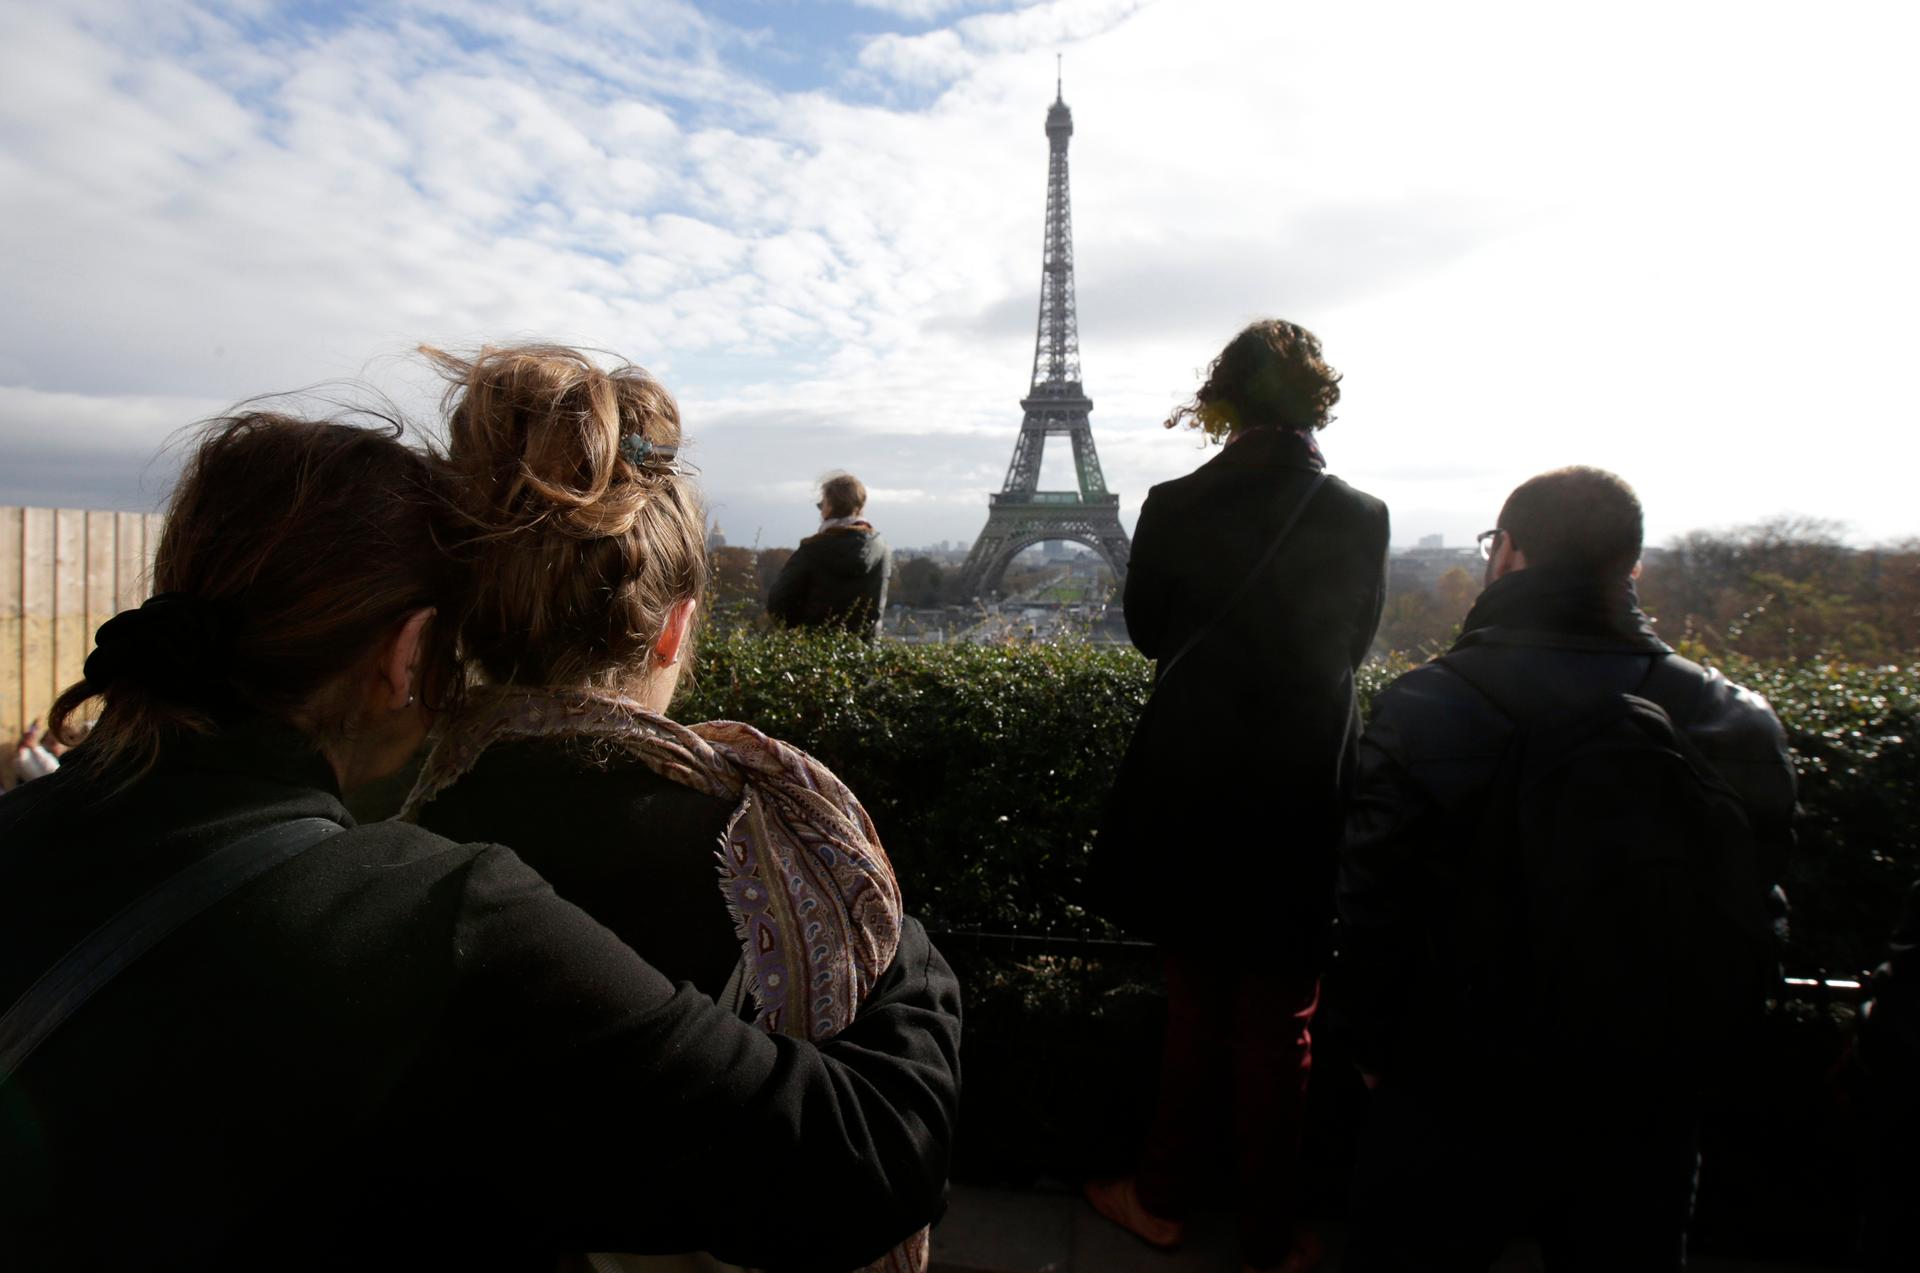 People observe a minute of silence at the Trocadero in front the Eiffel Tower to pay tribute to the victims of the series of deadly attacks on Friday in Paris, France, November 16, 2015.